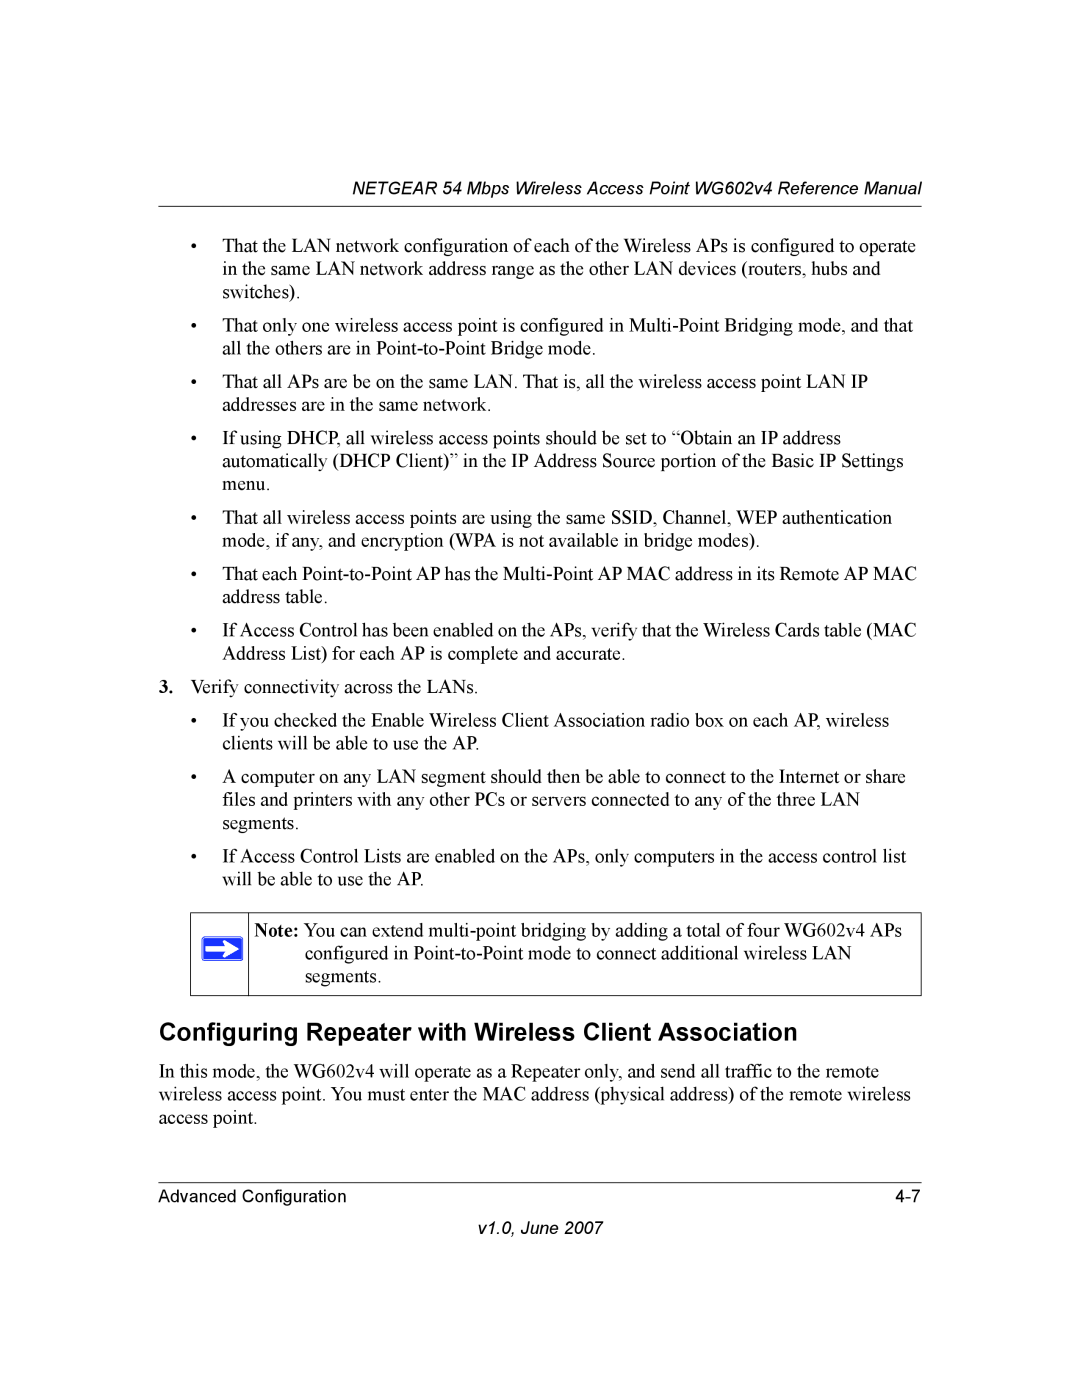 NETGEAR WG602V4 manual Configuring Repeater with Wireless Client Association 